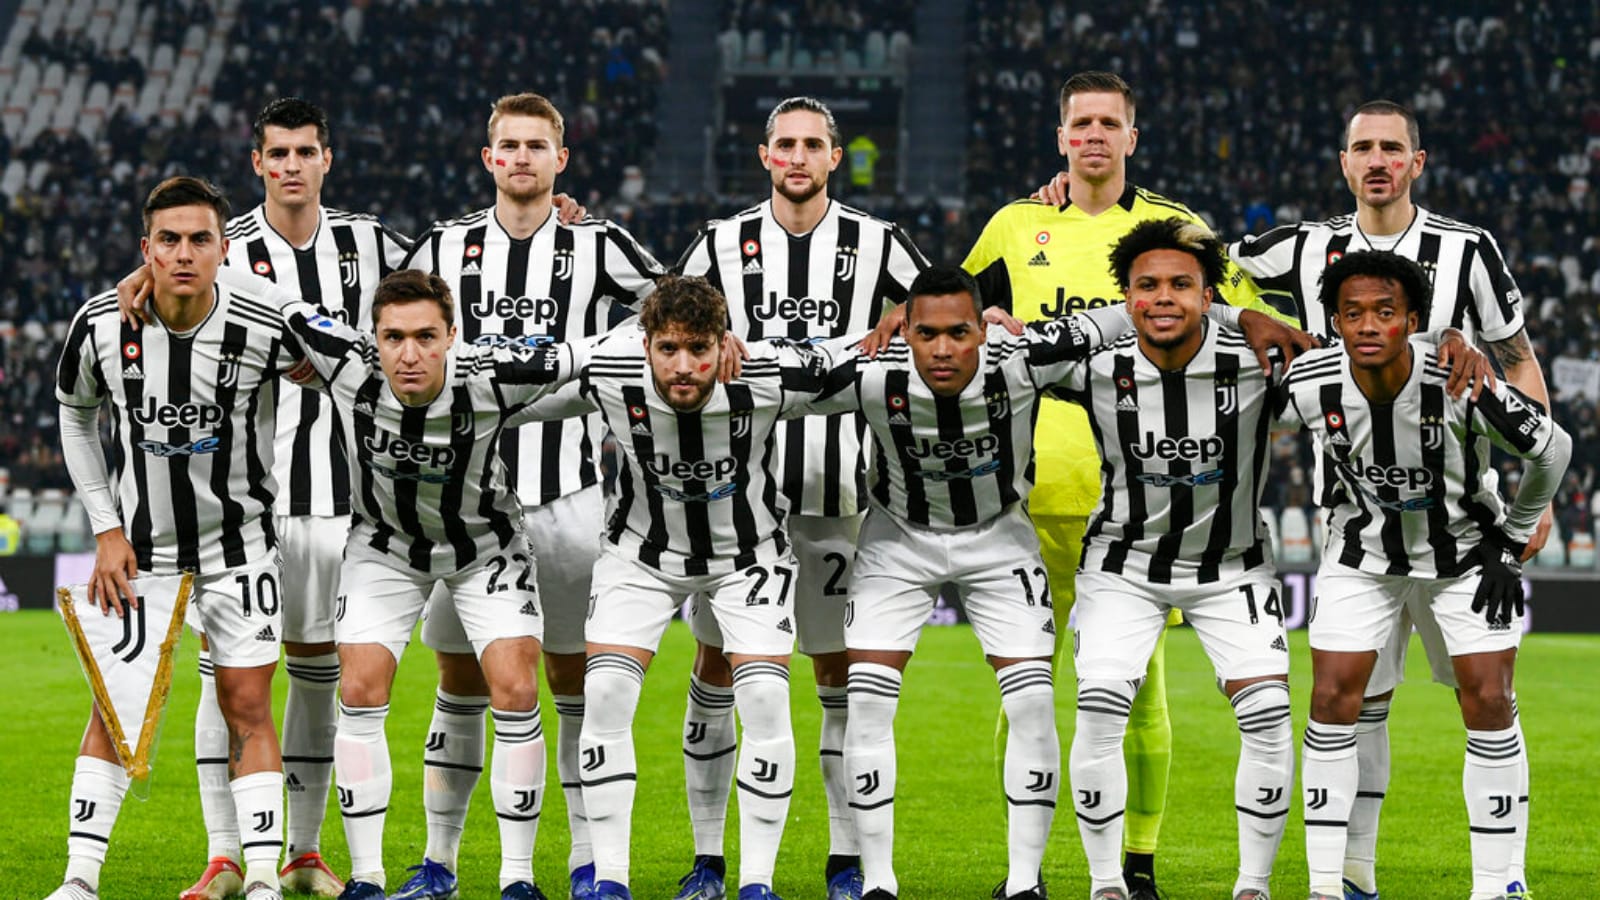 Juventus 'Could be Relegated to Serie B and Stripped of Scudetto'